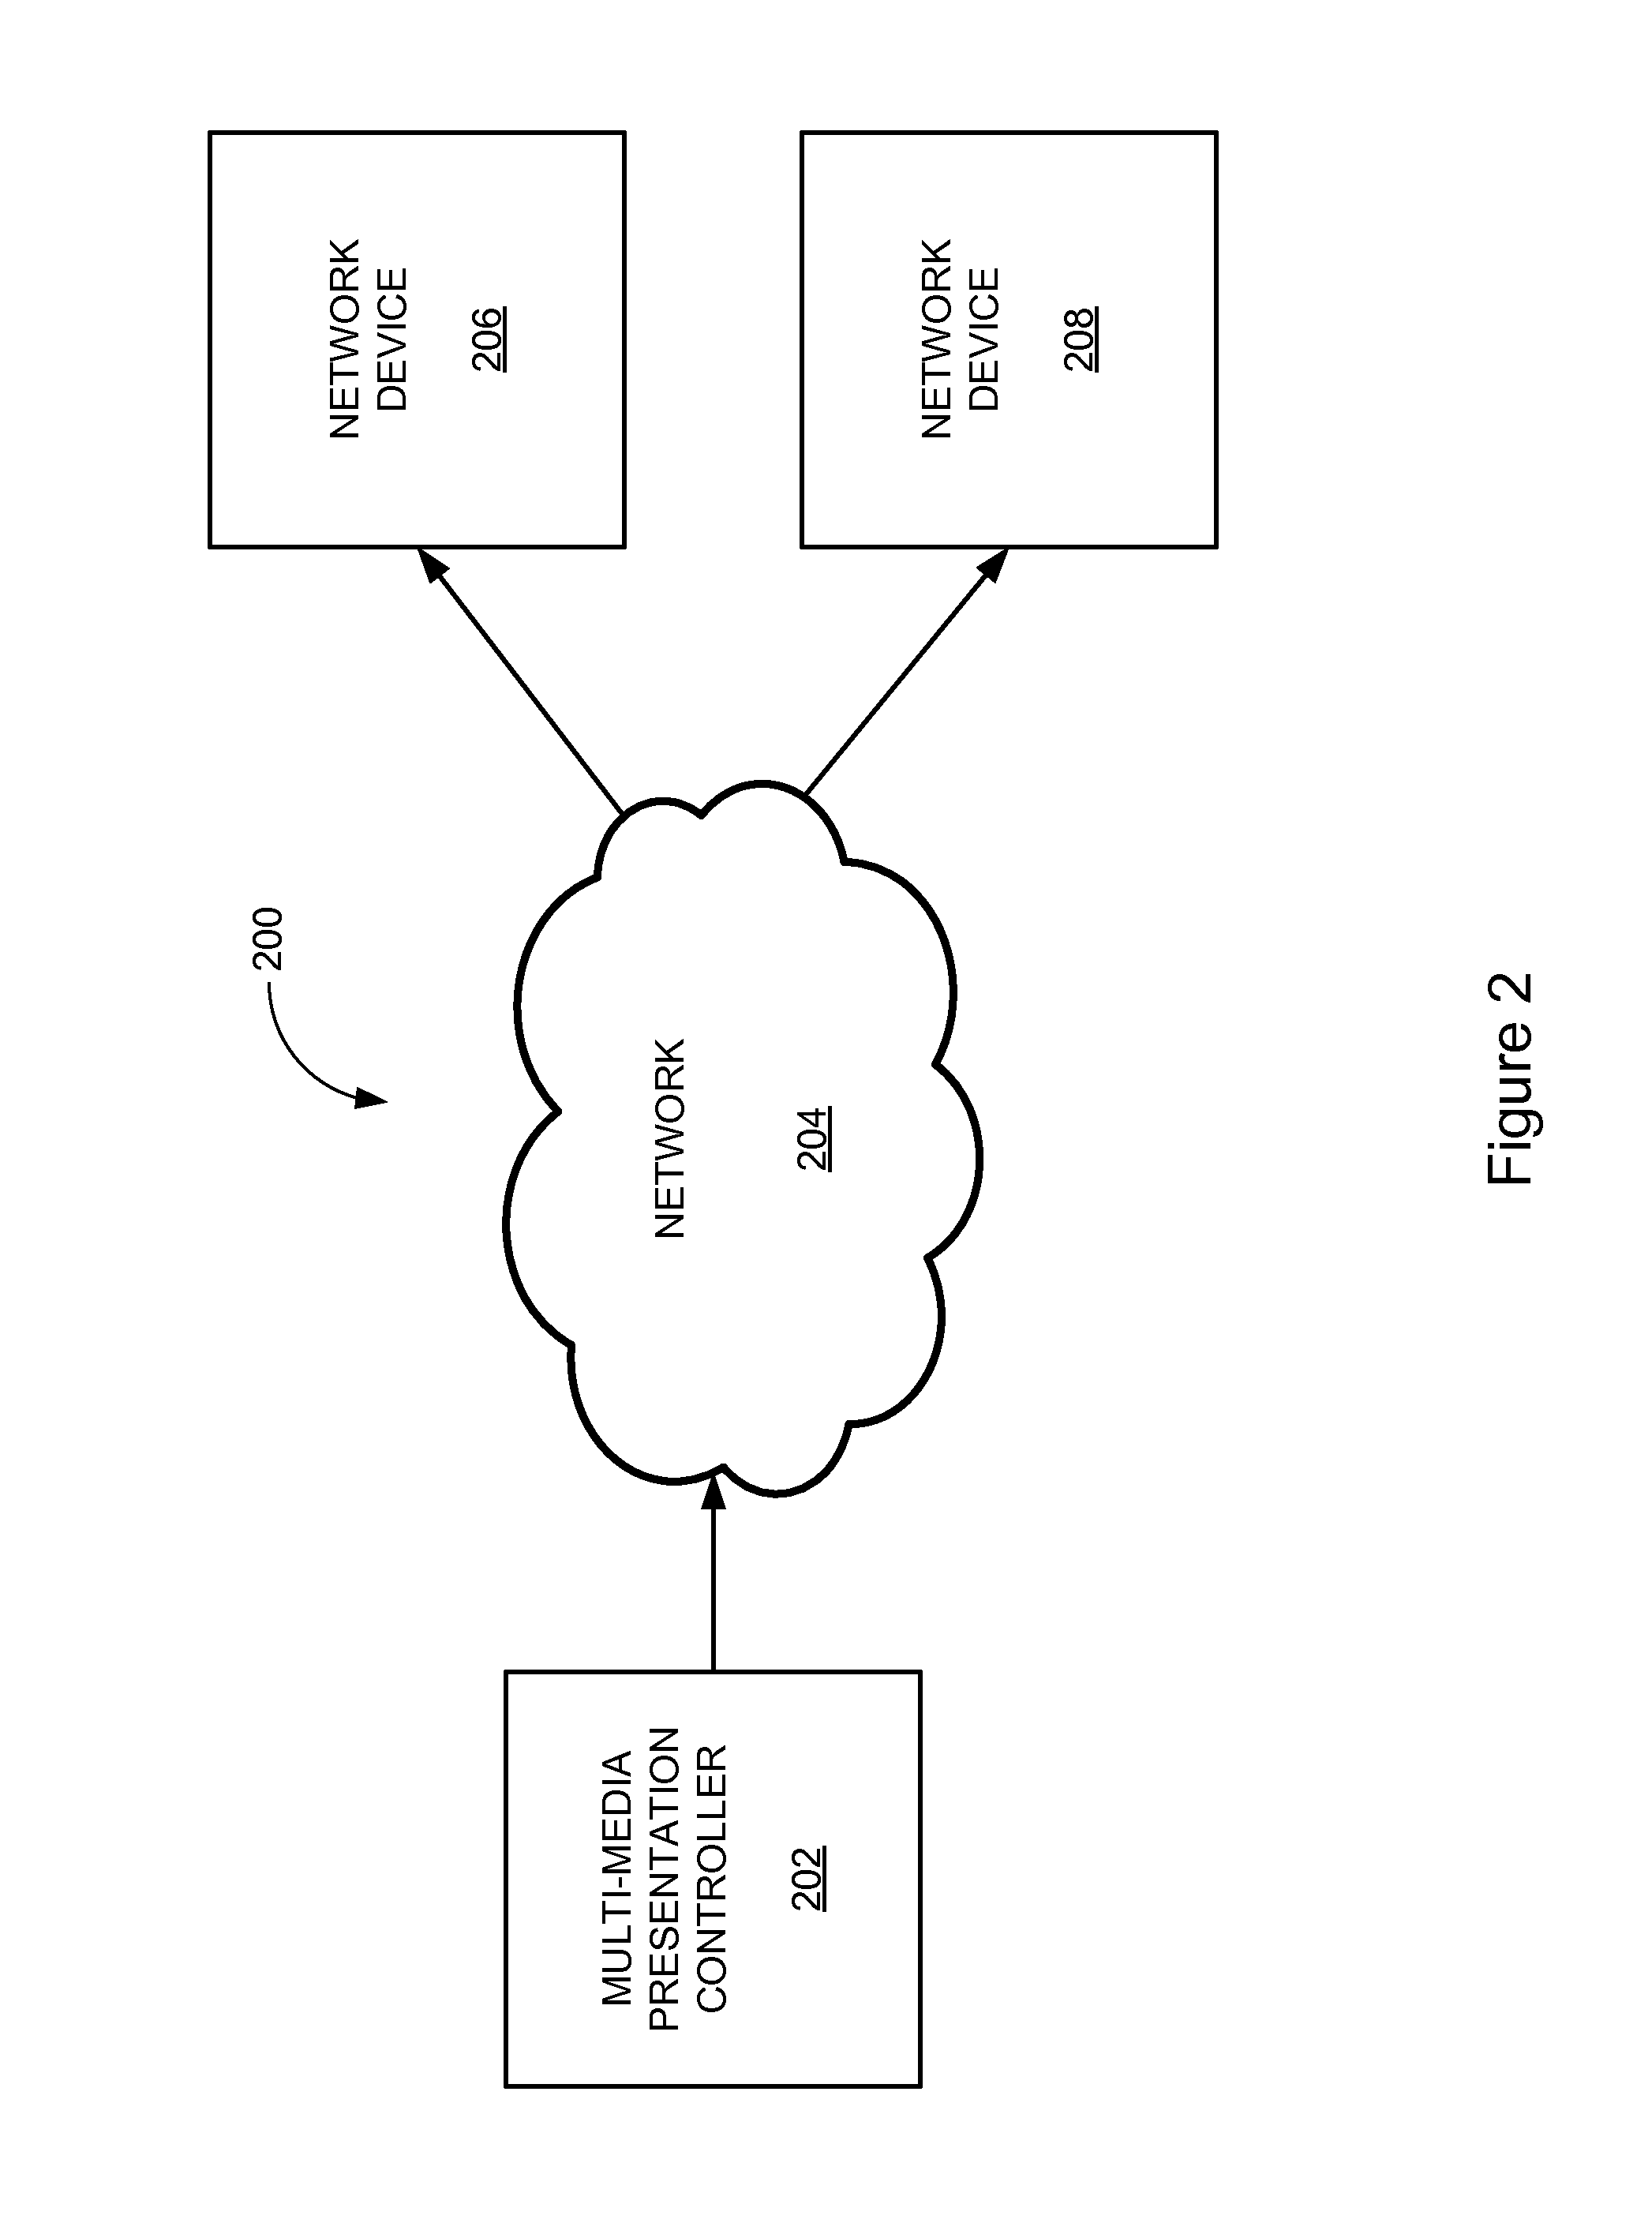 Apparatus and method for controlling a multi-media presentation